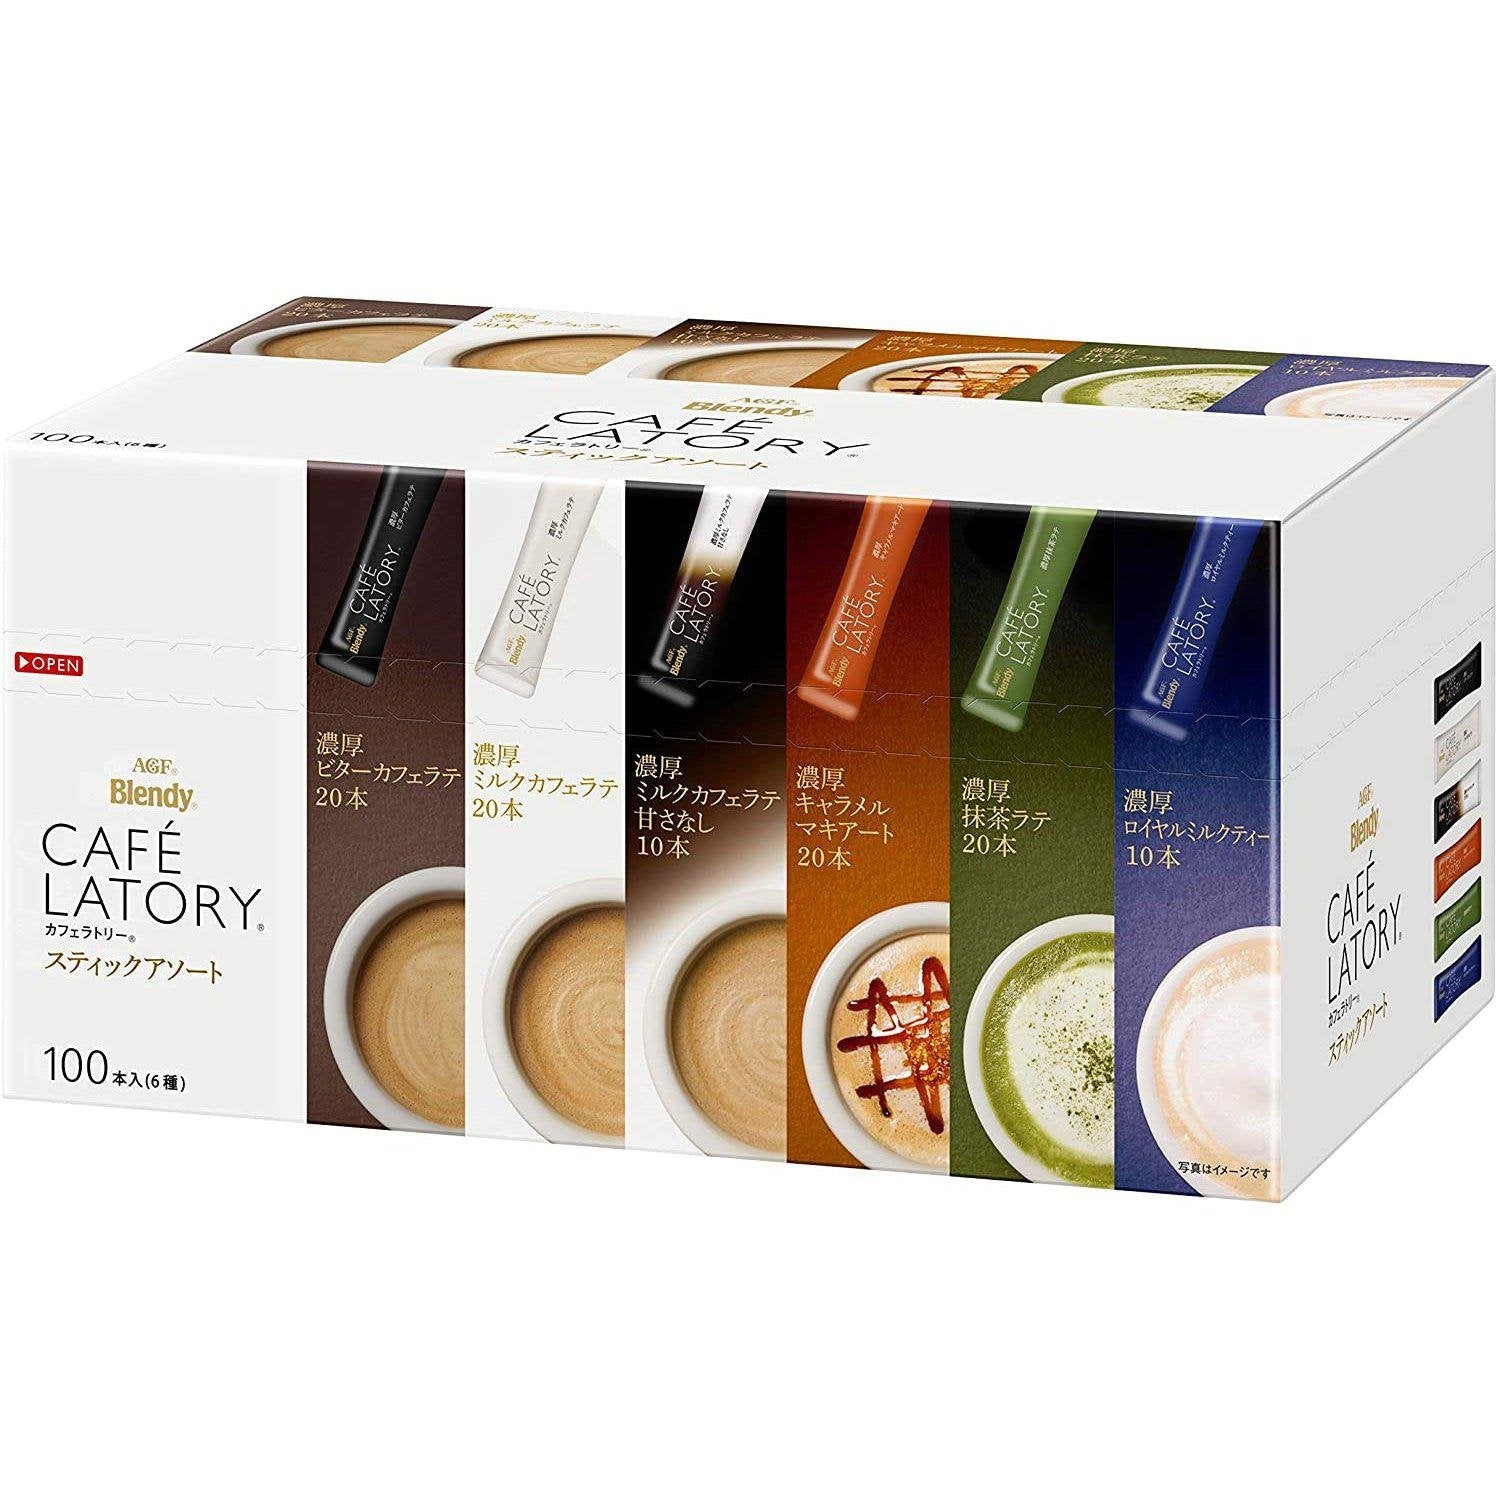 AGF Blendy Cafe Latory Instant Tea and Coffee Assortment Box 100 Sticks